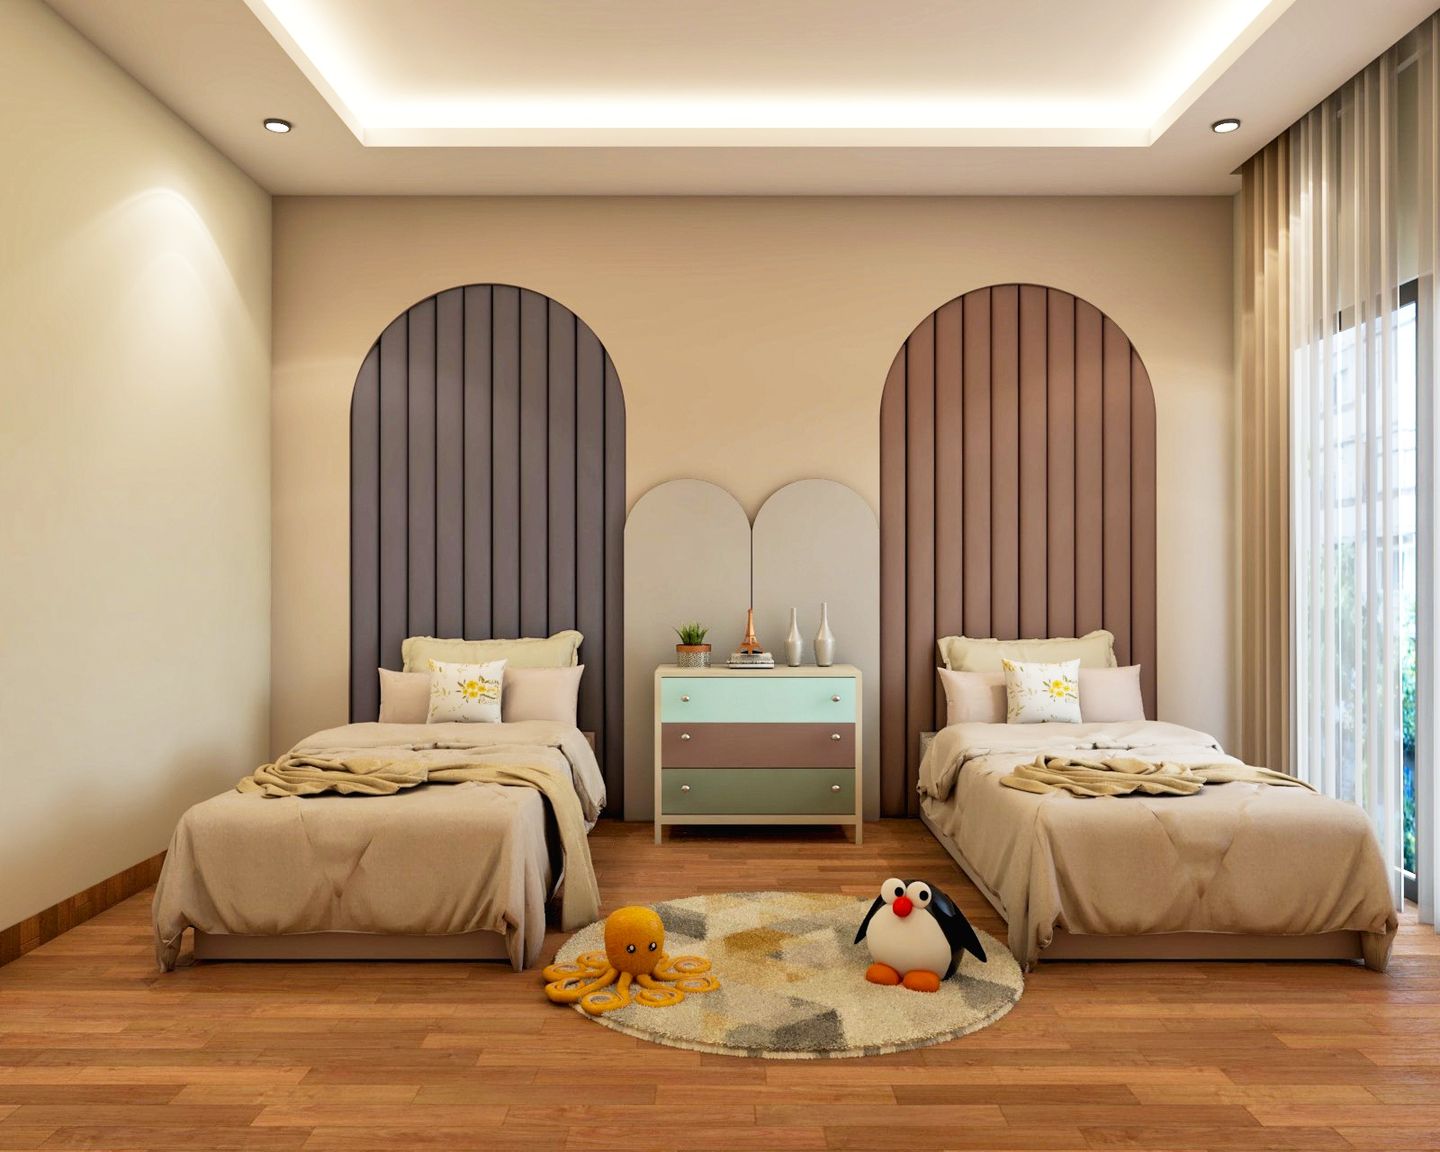 Kids' Room Design With White Twin Beds - Livspace